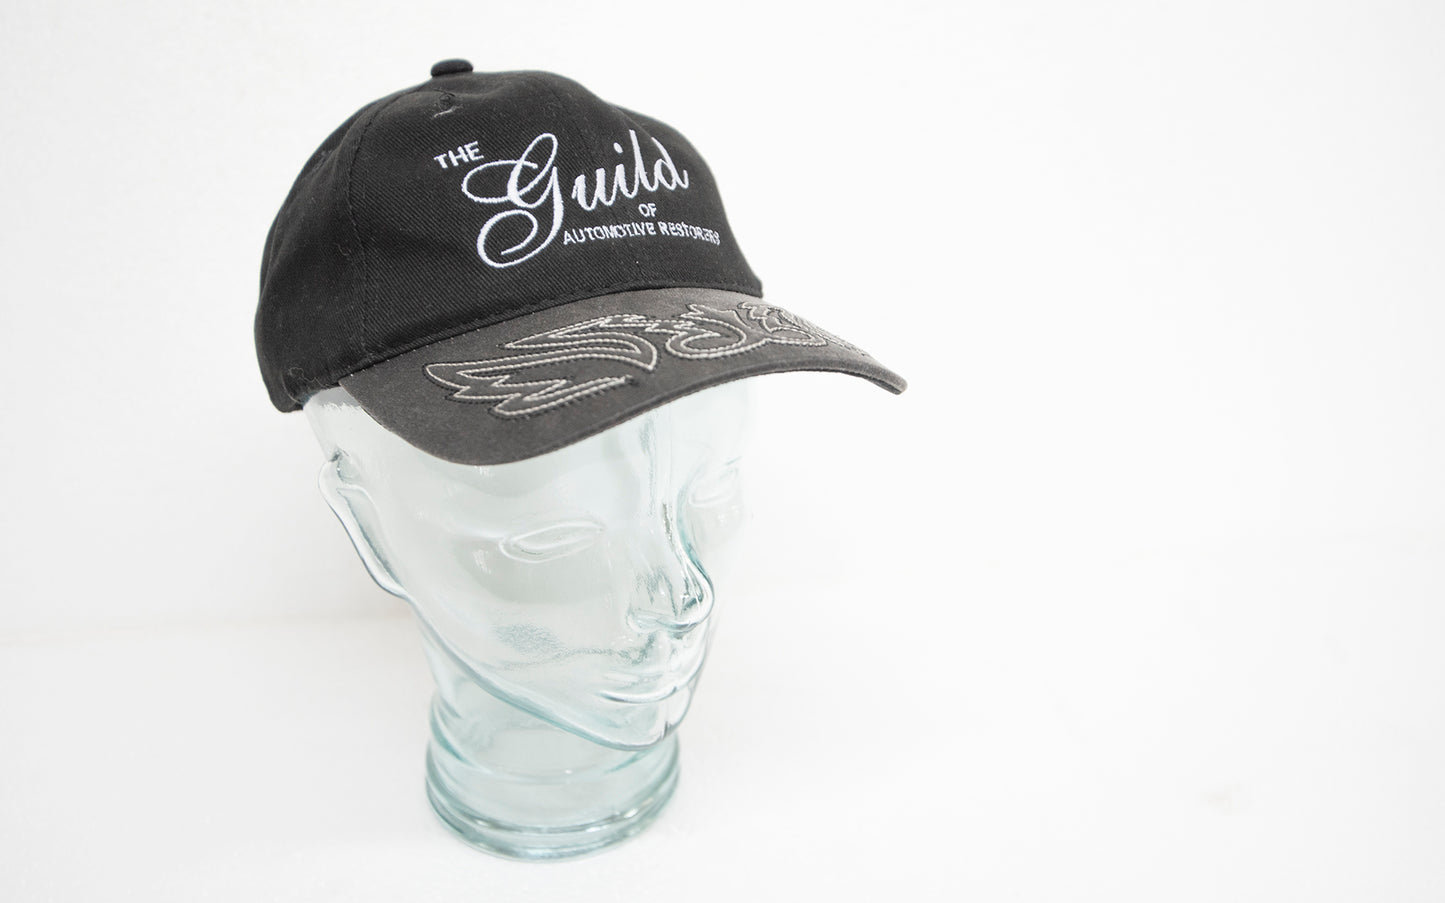 Guild Embroidered Logo Cap with charcoal grey embroidered brim